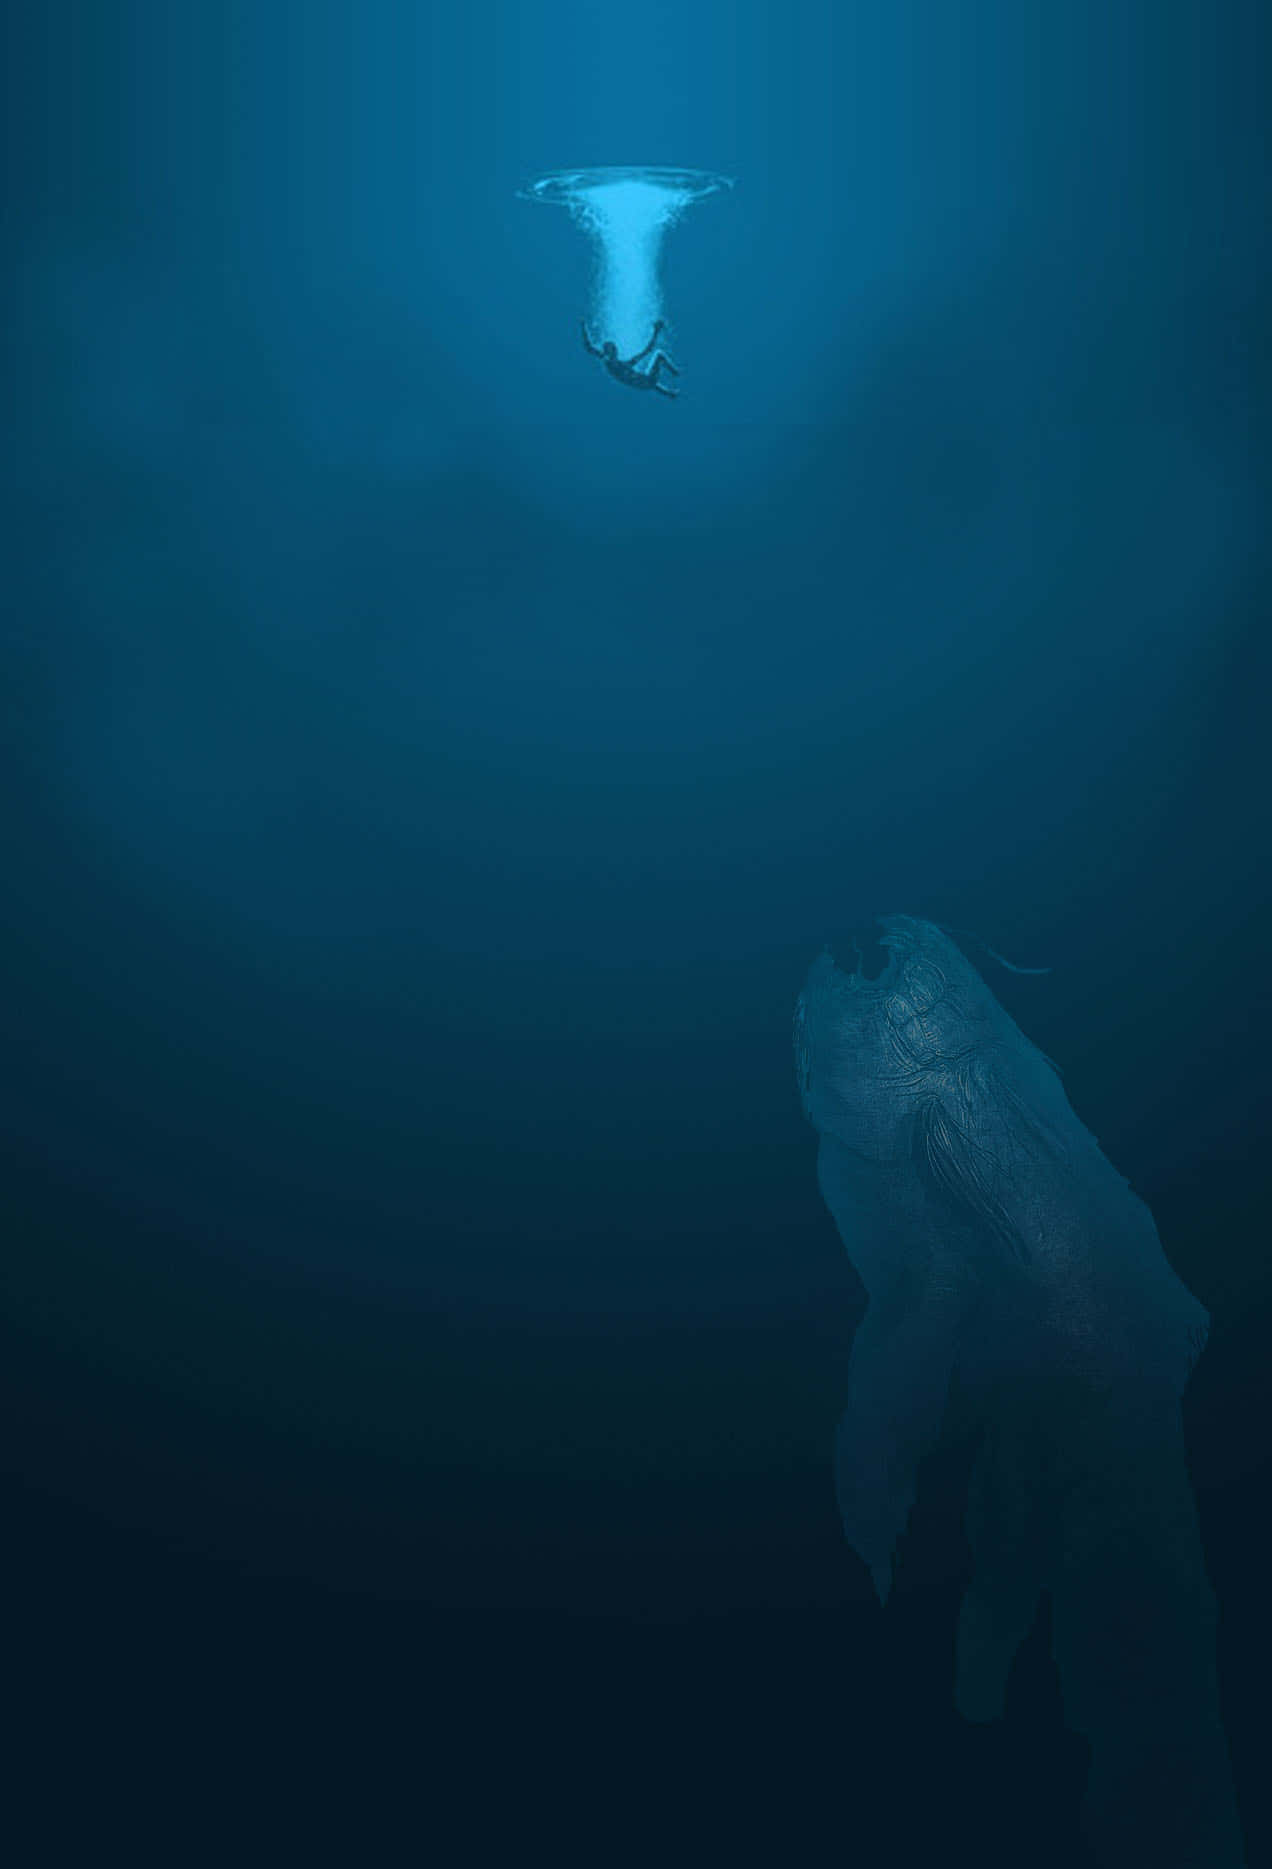 Man Drowning With Scary Ocean Monster Picture 1272 x 1869 Picture